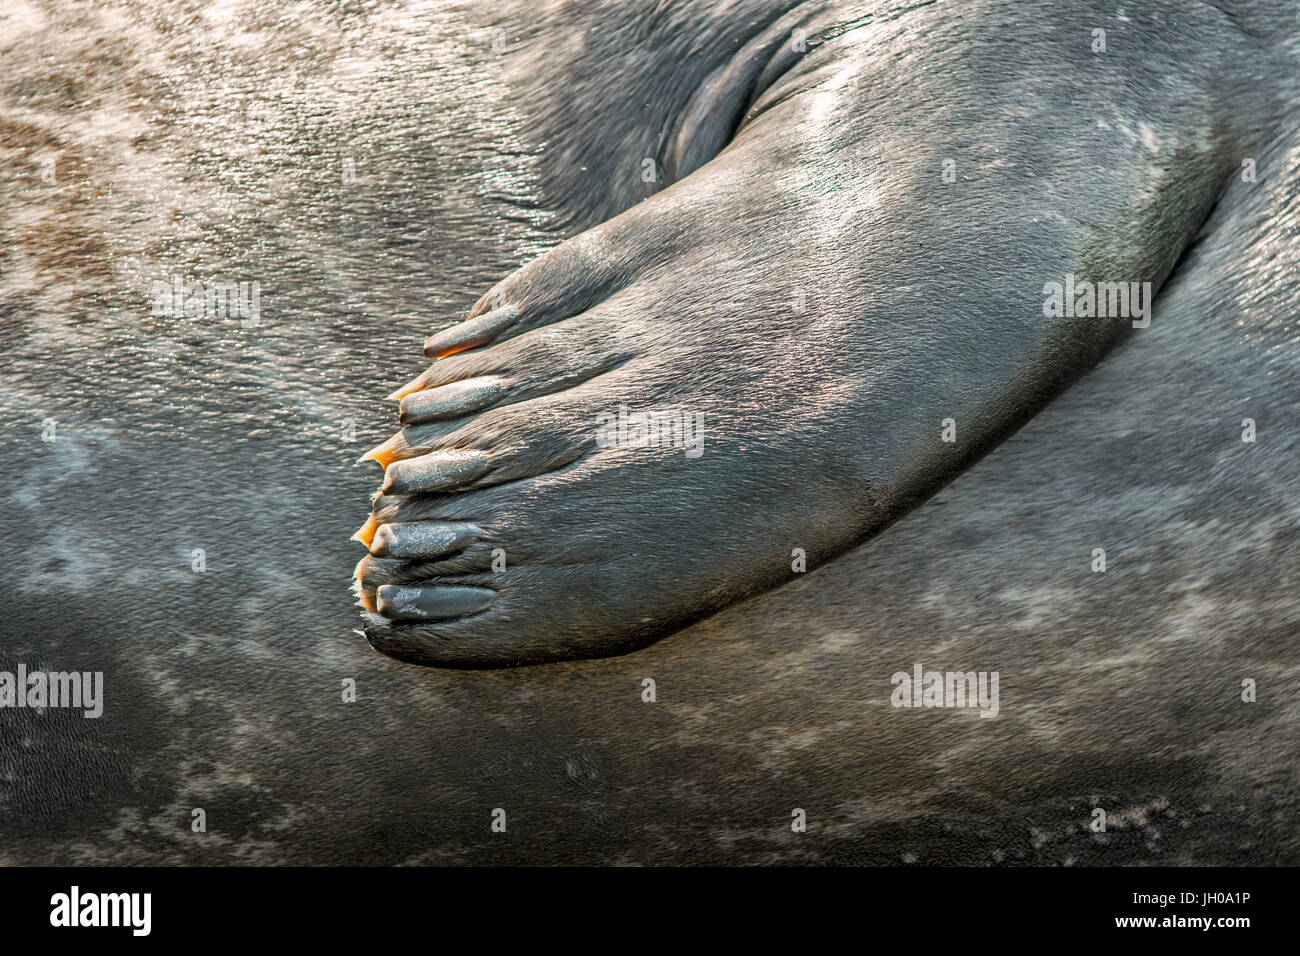 Common seal / harbor seal / harbour seal (Phoca vitulina), close up of fore flipper showing webbed digits with blunt claws Stock Photo